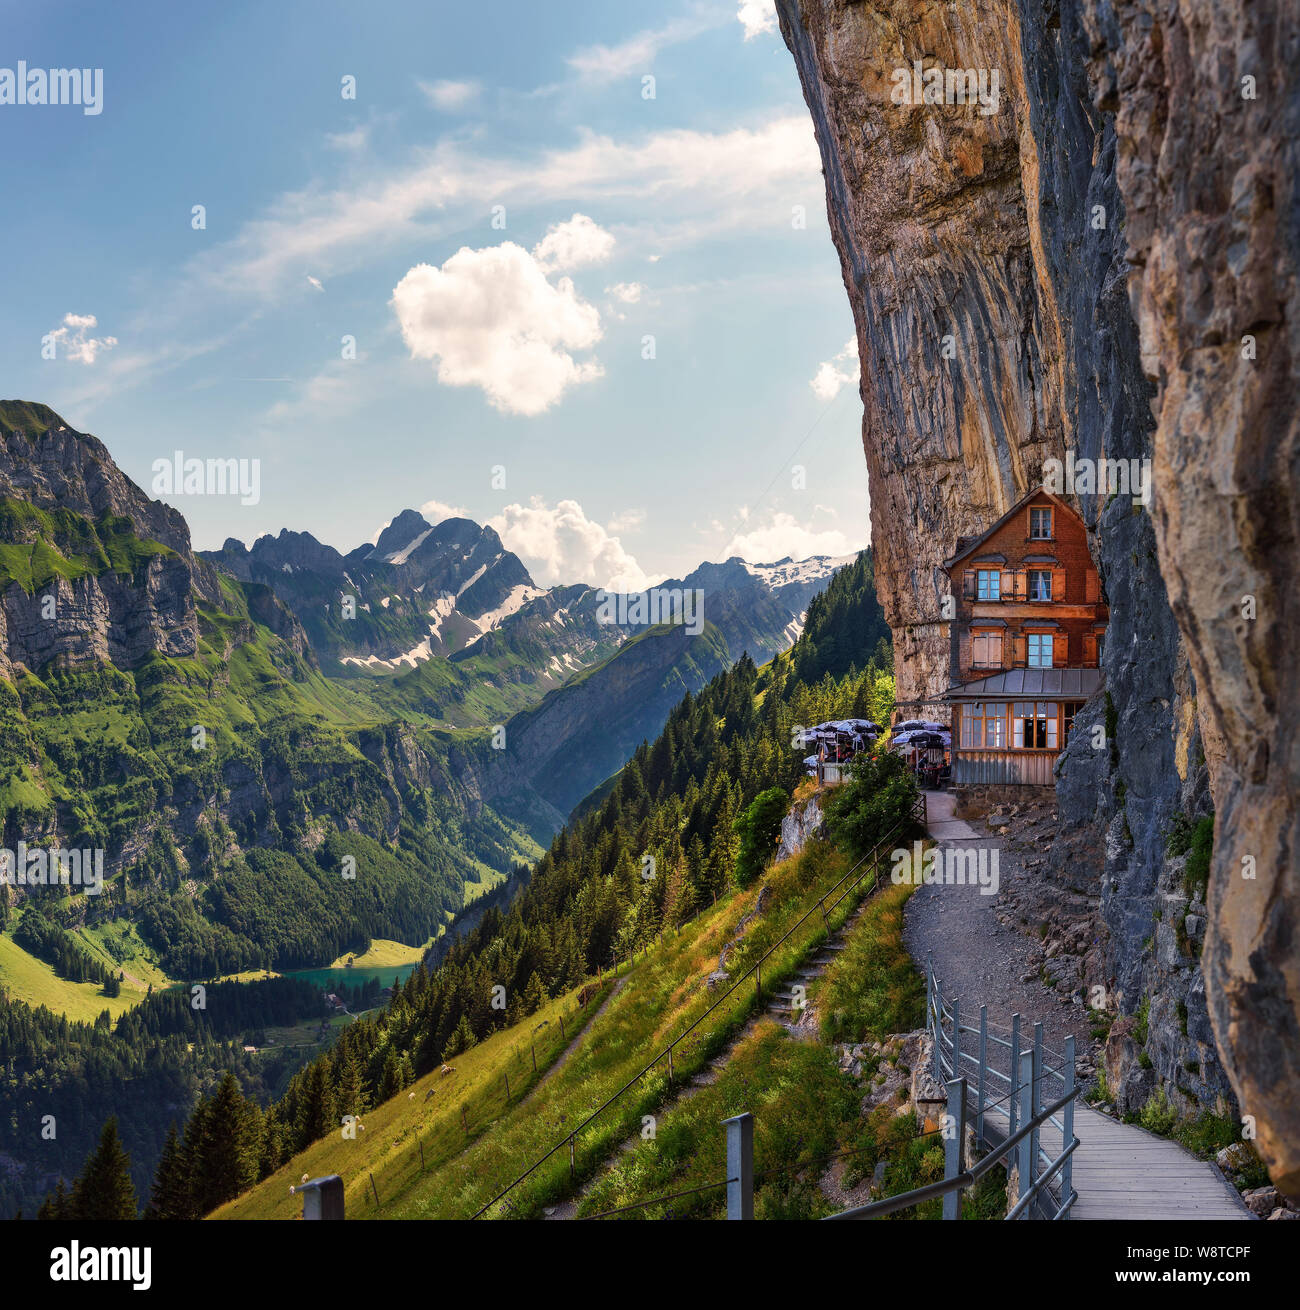 Swiss Alps and a restaurant under a cliff on mountain Ebenalp in Switzerland Stock Photo